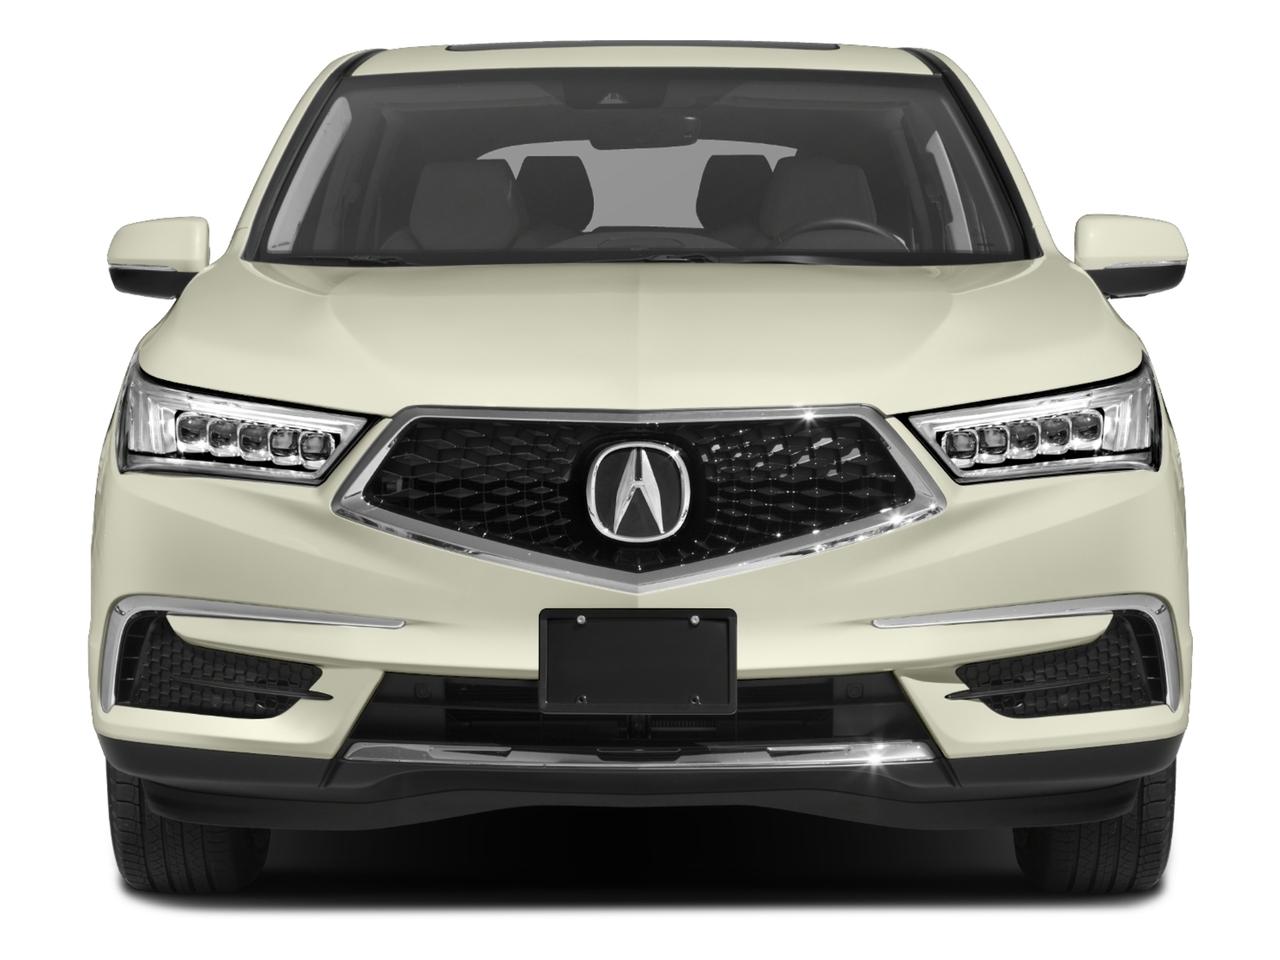 Used 2018 Acura Mdx For Sale In Jersey Village Tx Silver